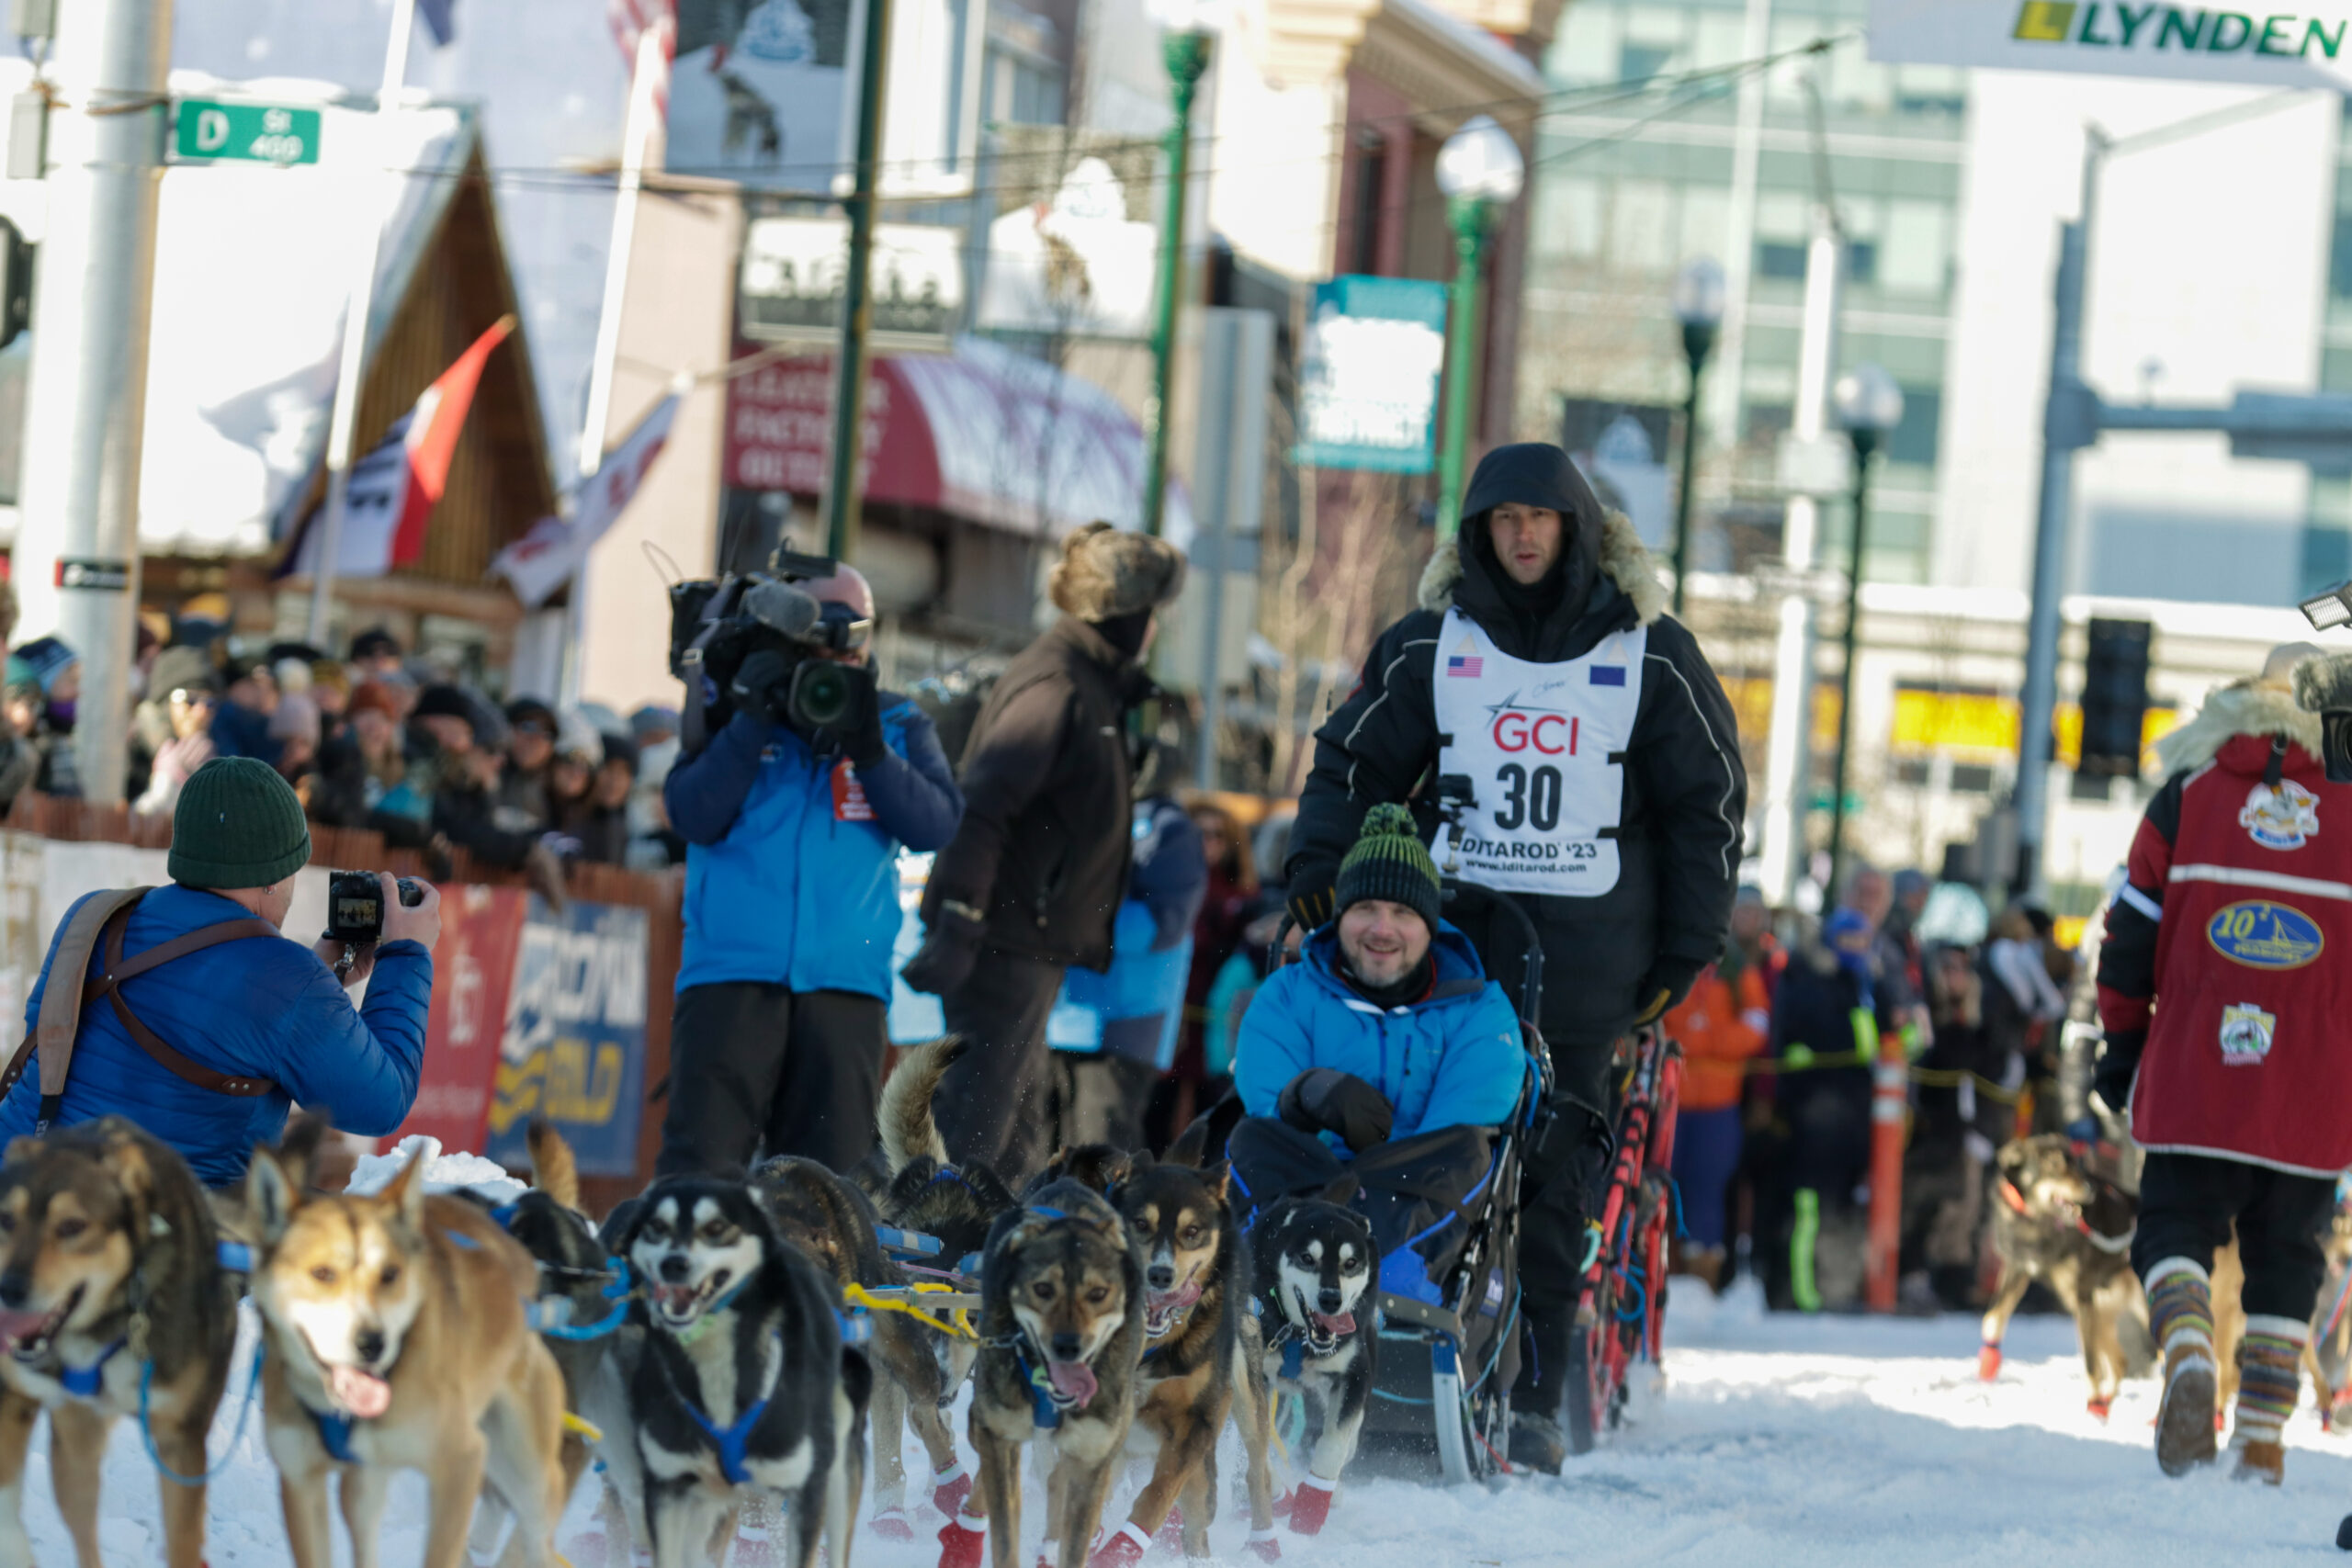 A man on a sled is being pulled by multiple dogs.